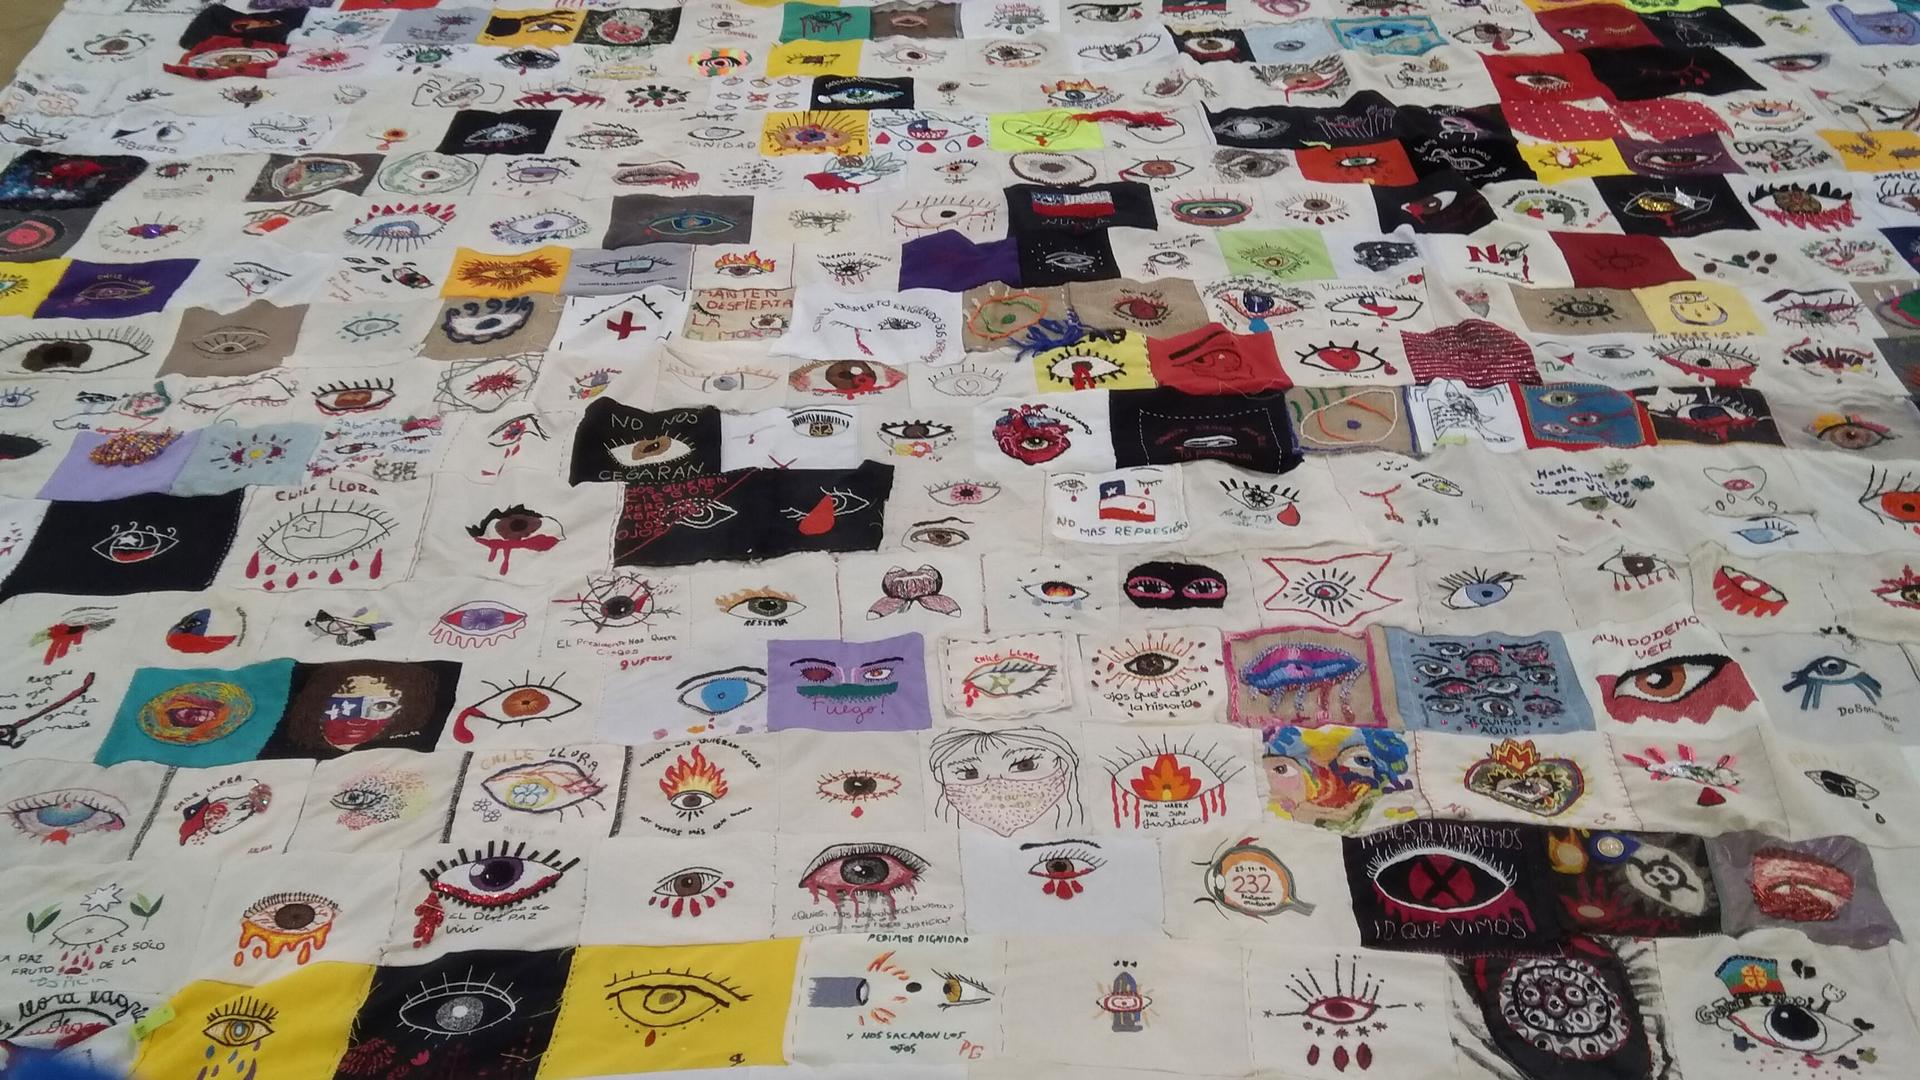 A close-up section of several rows of embroided protest art showing bleeding eyes.